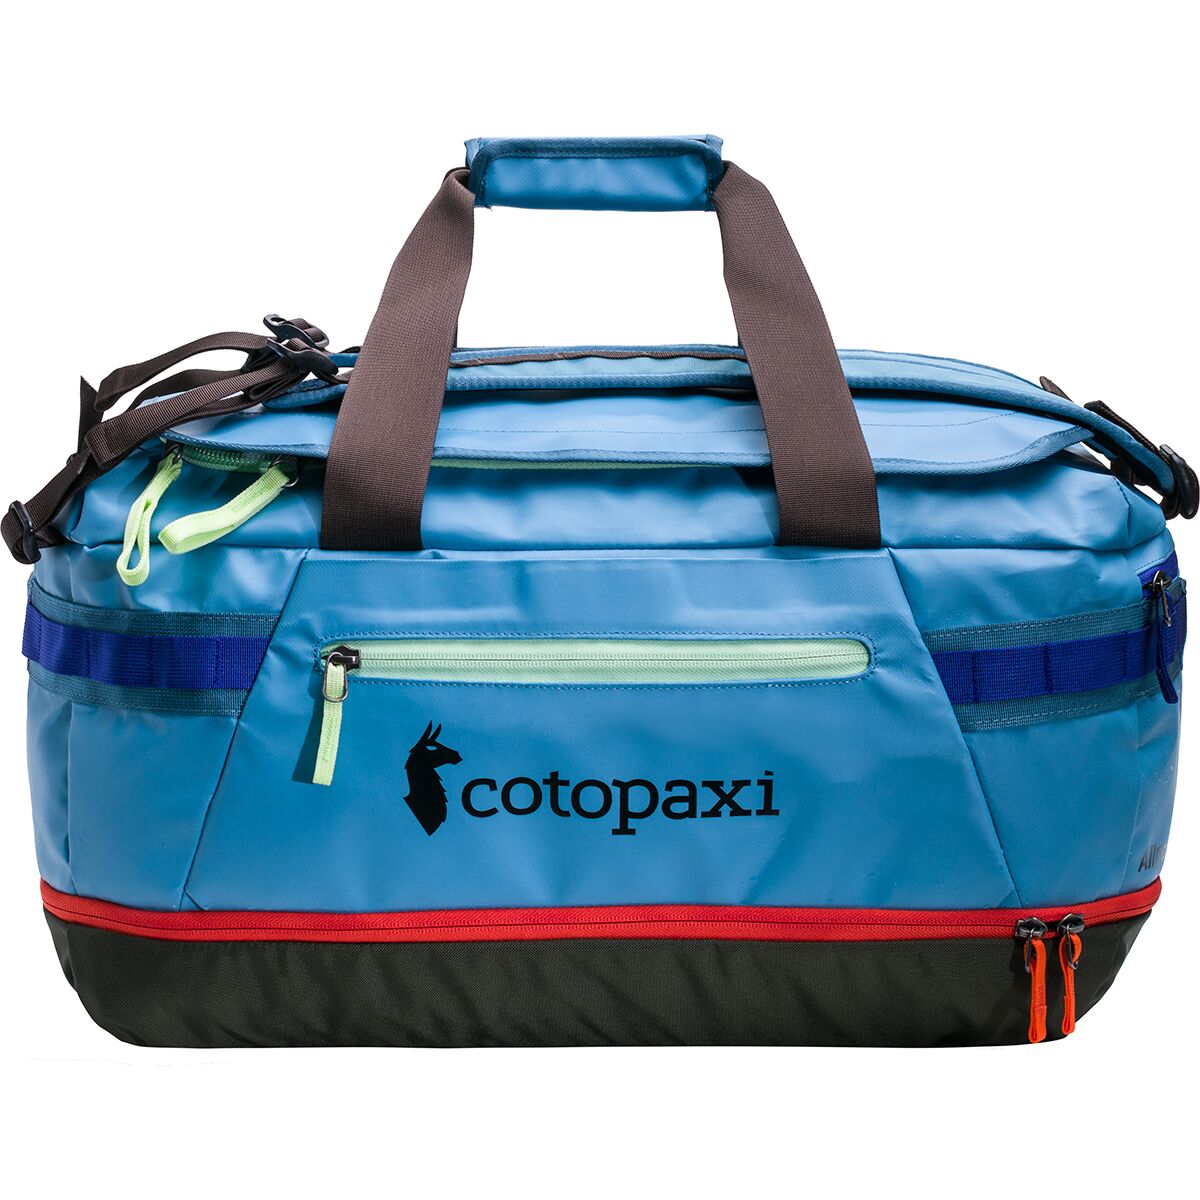 Cotopaxi Bags and luggage